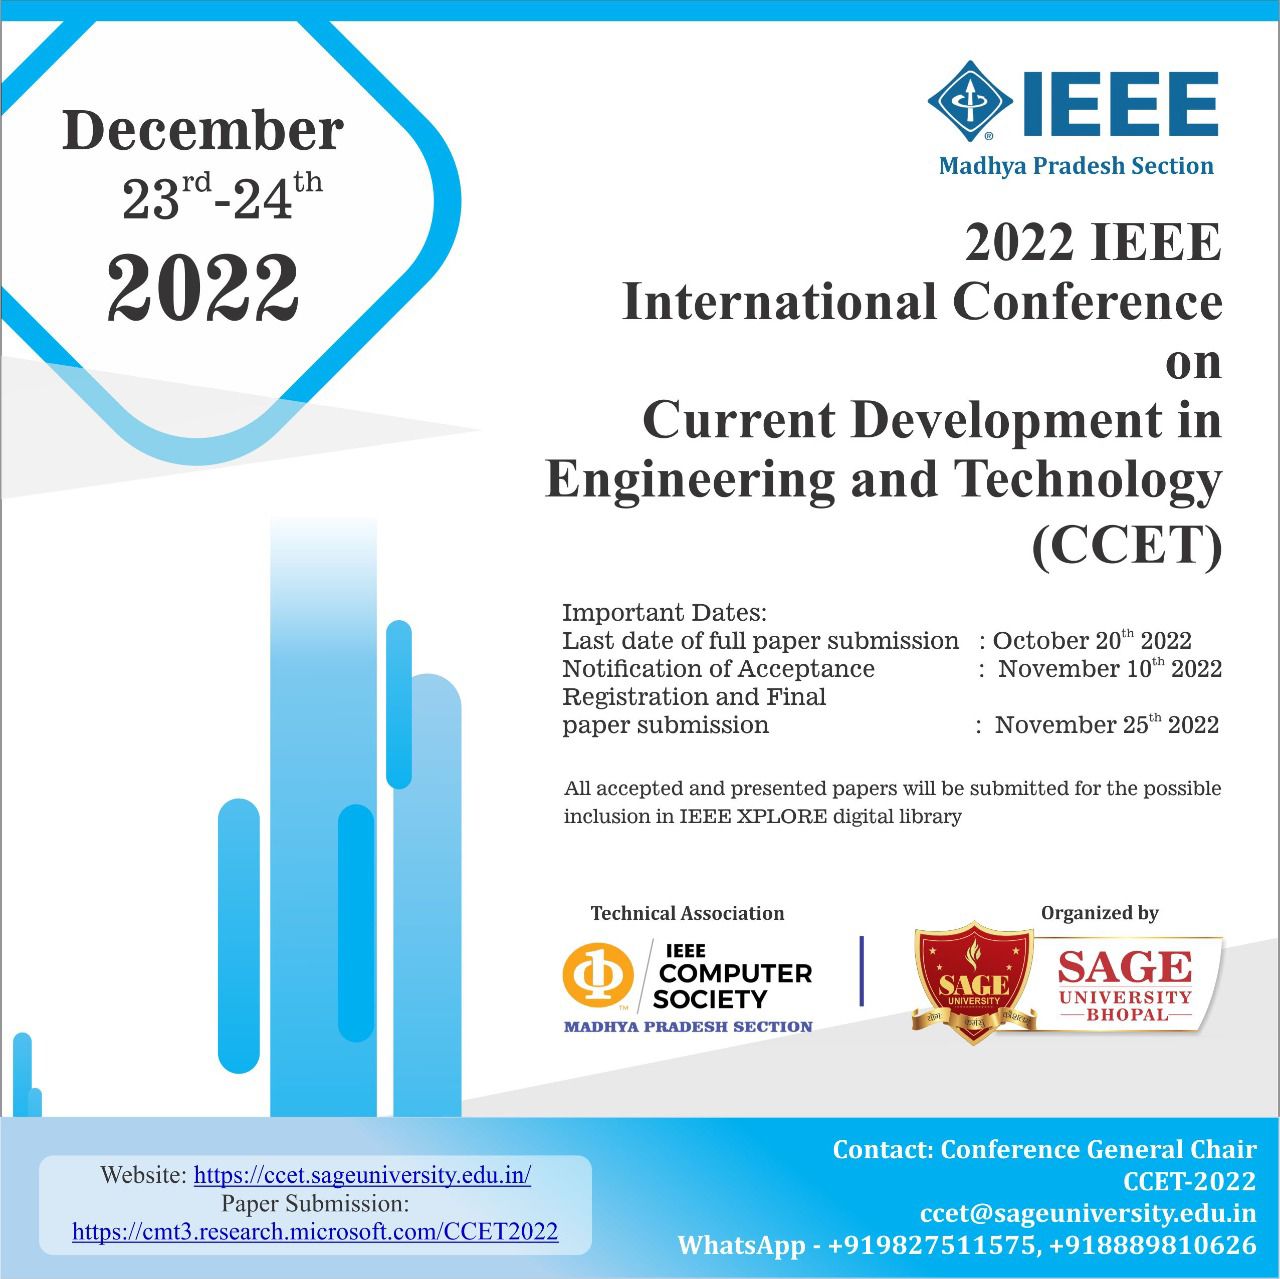 International Conference on Current Development in Engineering and Technology (ICCET-2022)